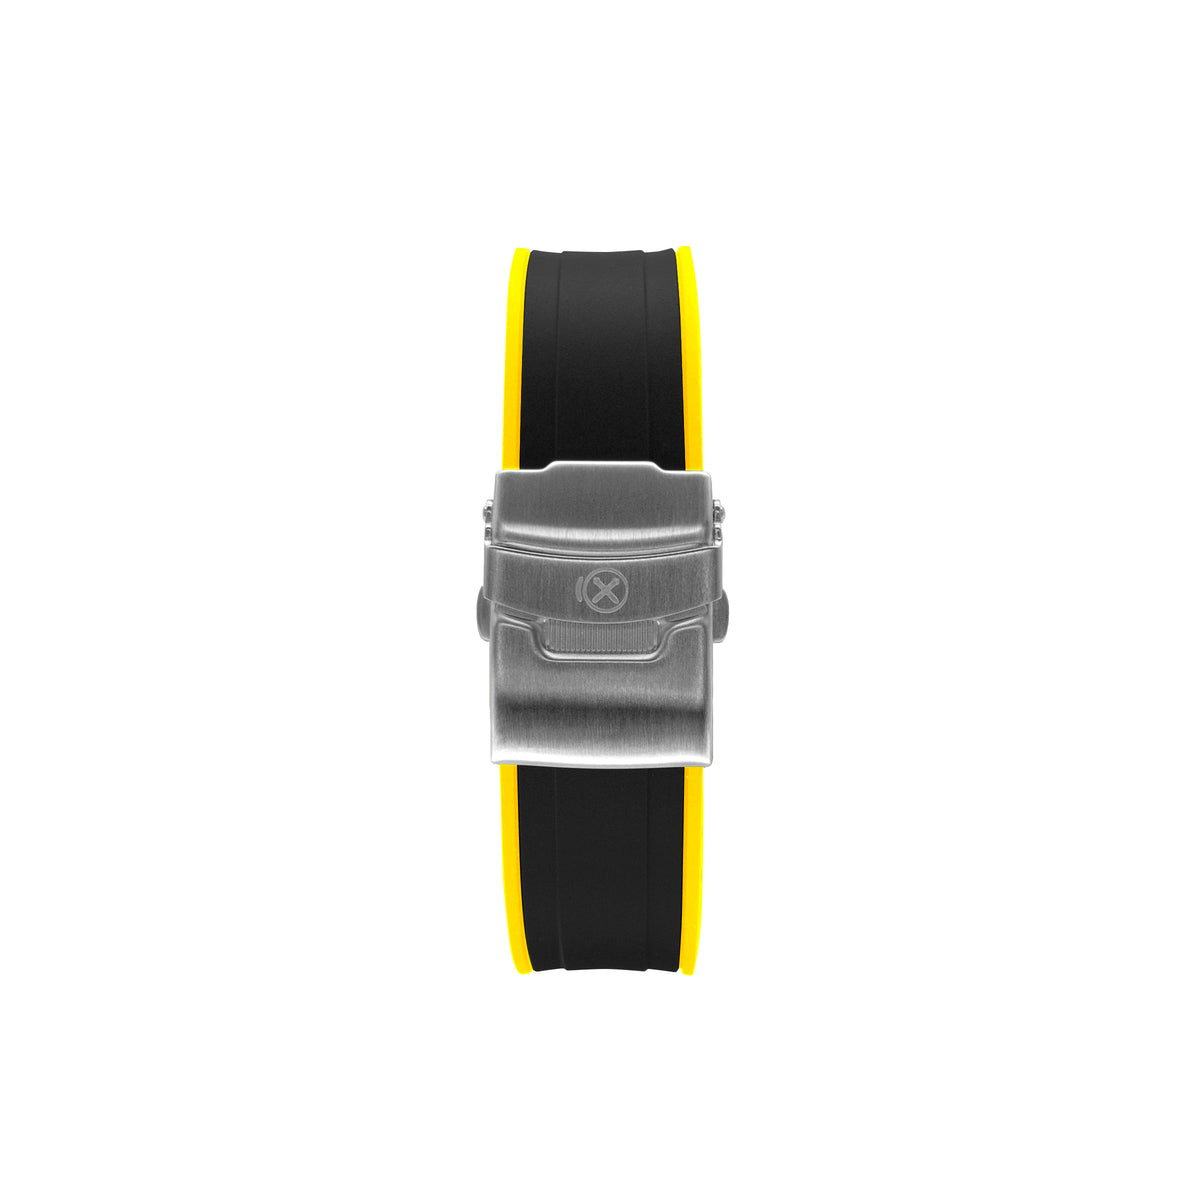 StrapXPro Curved End Rubber Strap for Seiko SKX/5KX in Black/Yellow (22mm)